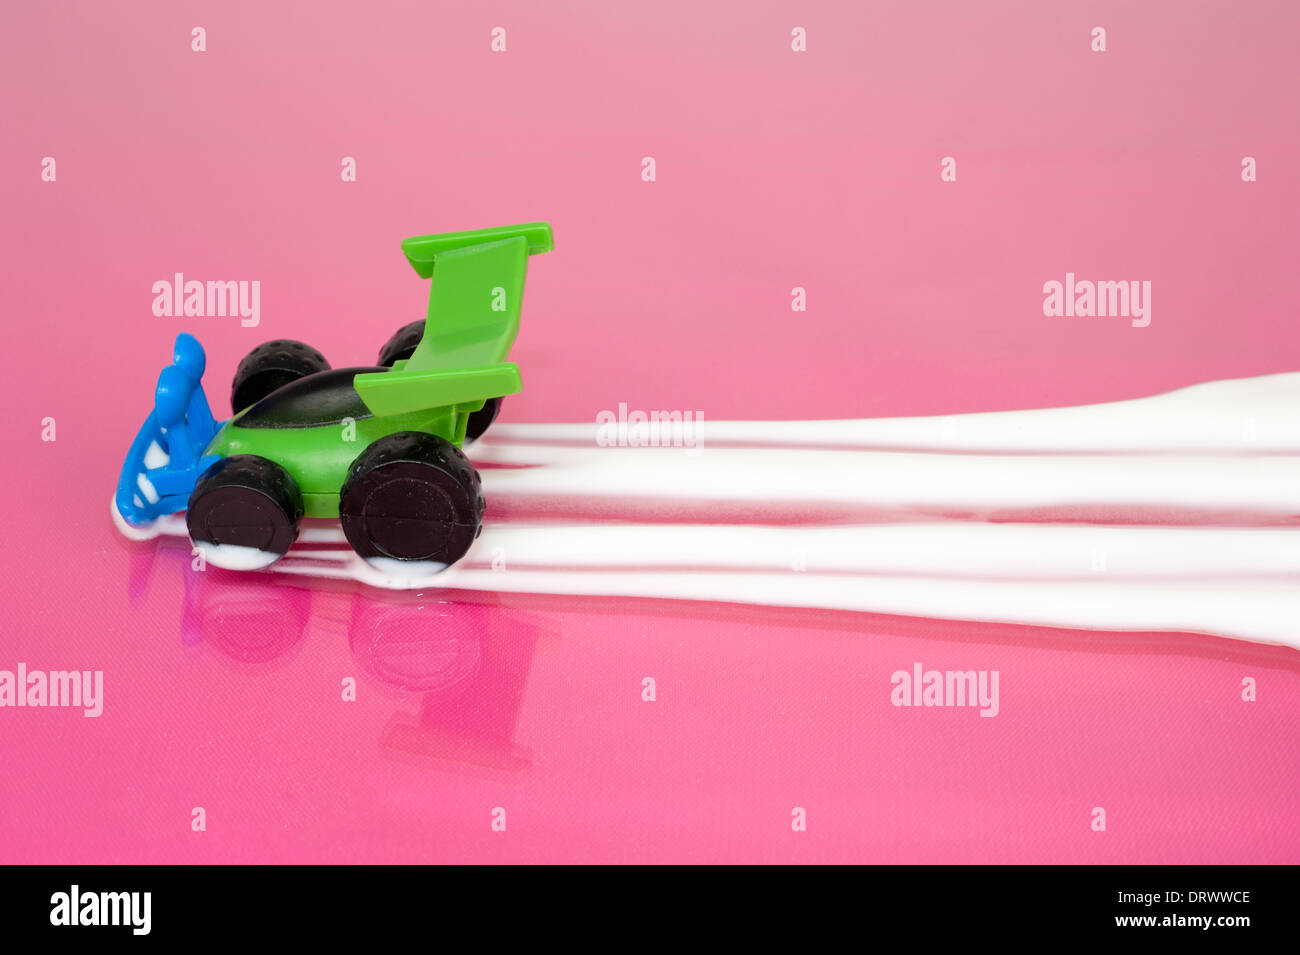 Toy car leaving a trail of yogurt on a pink surface Stock Photo